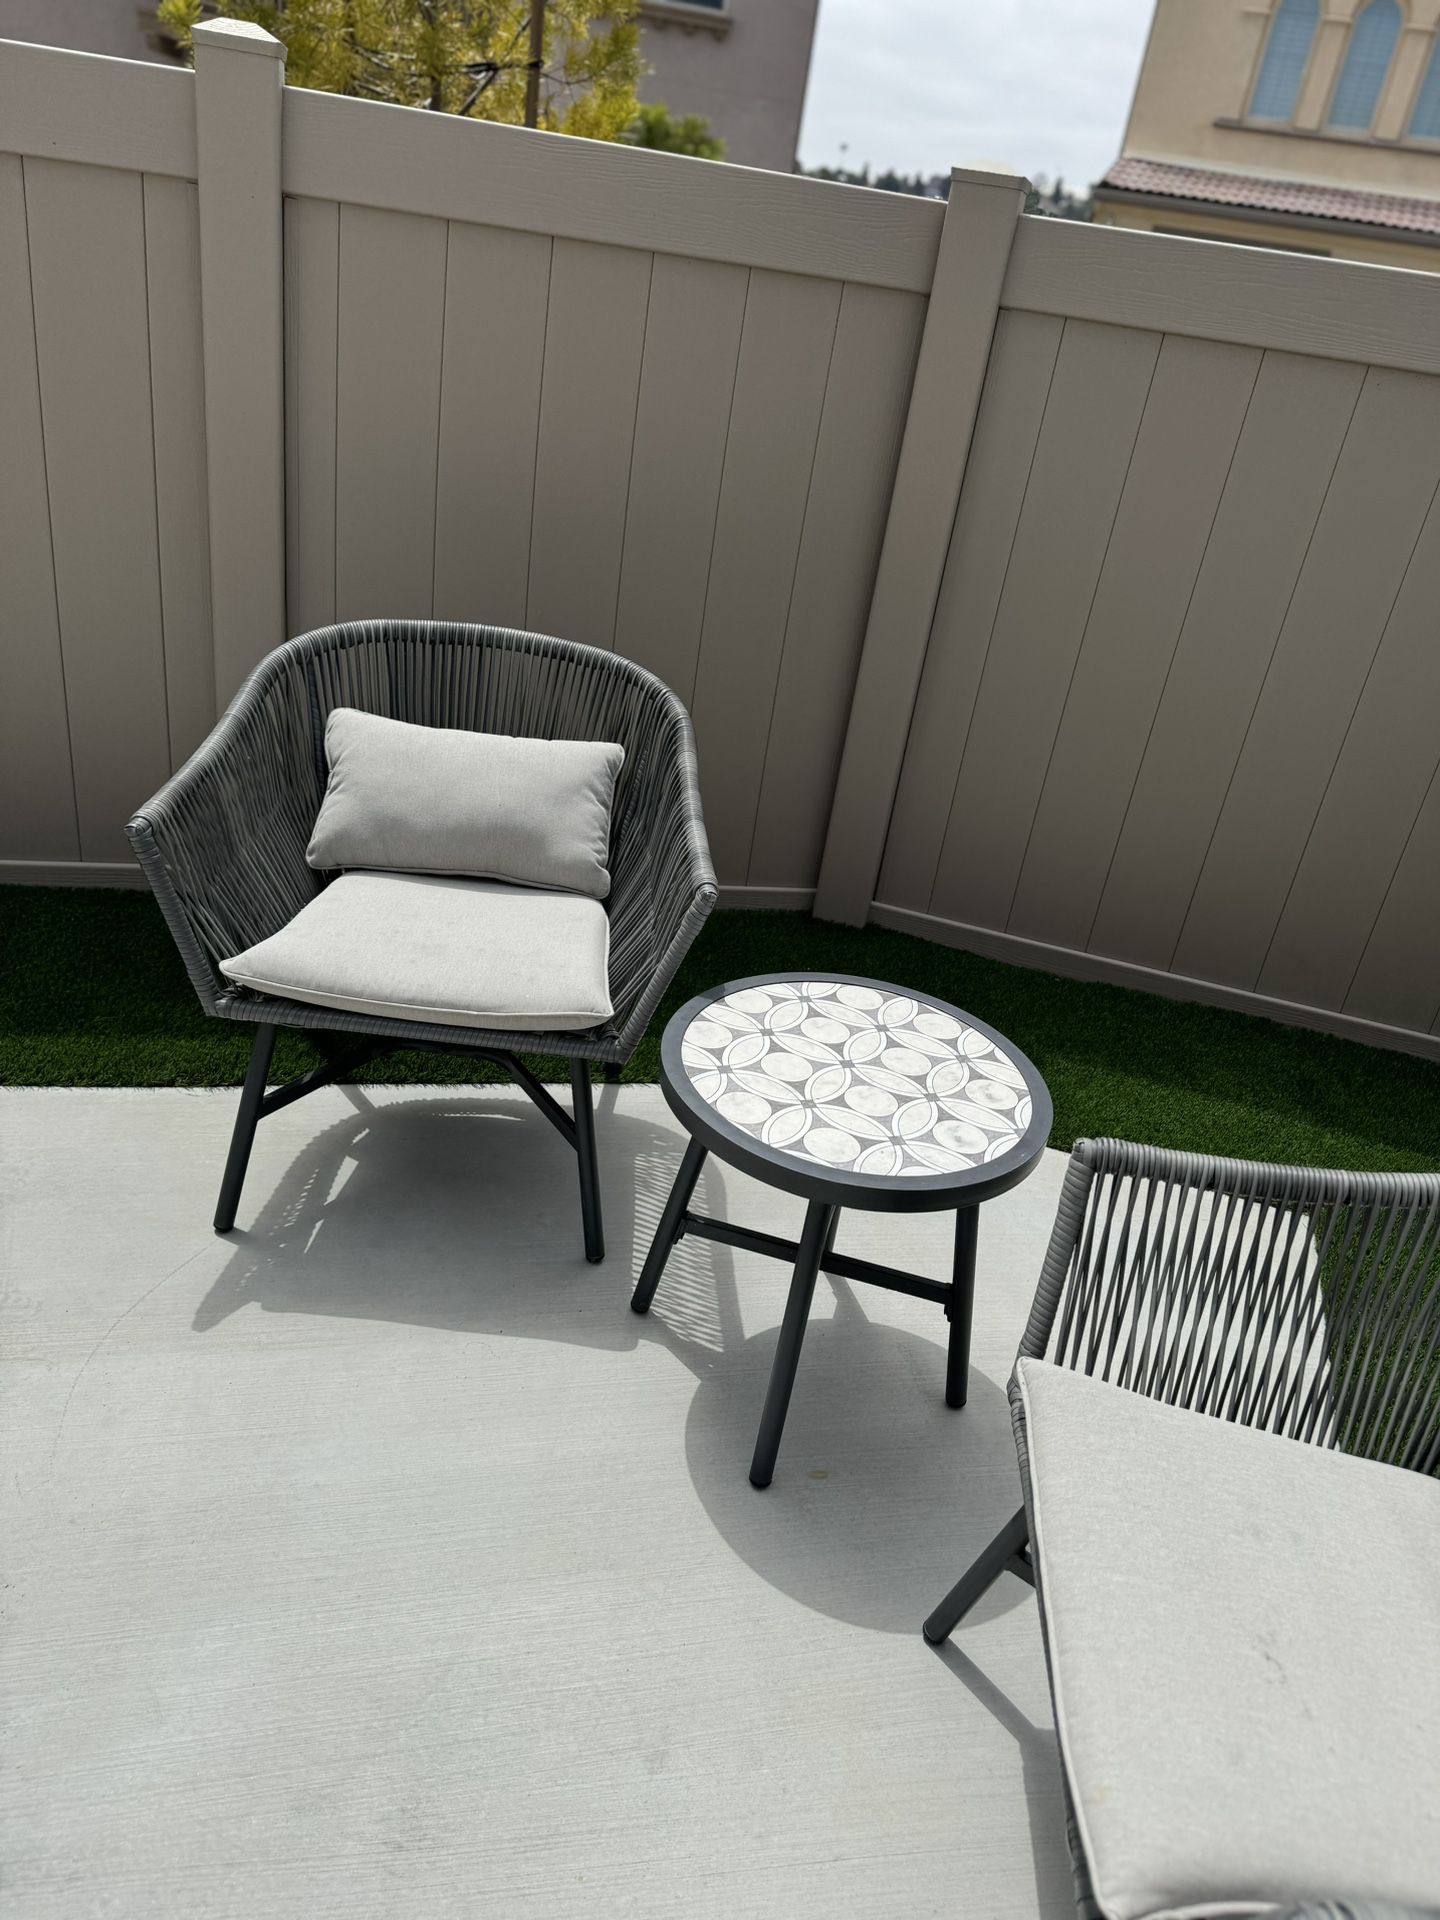 4 Patio Chairs 2 Tables (Patio Furniture)